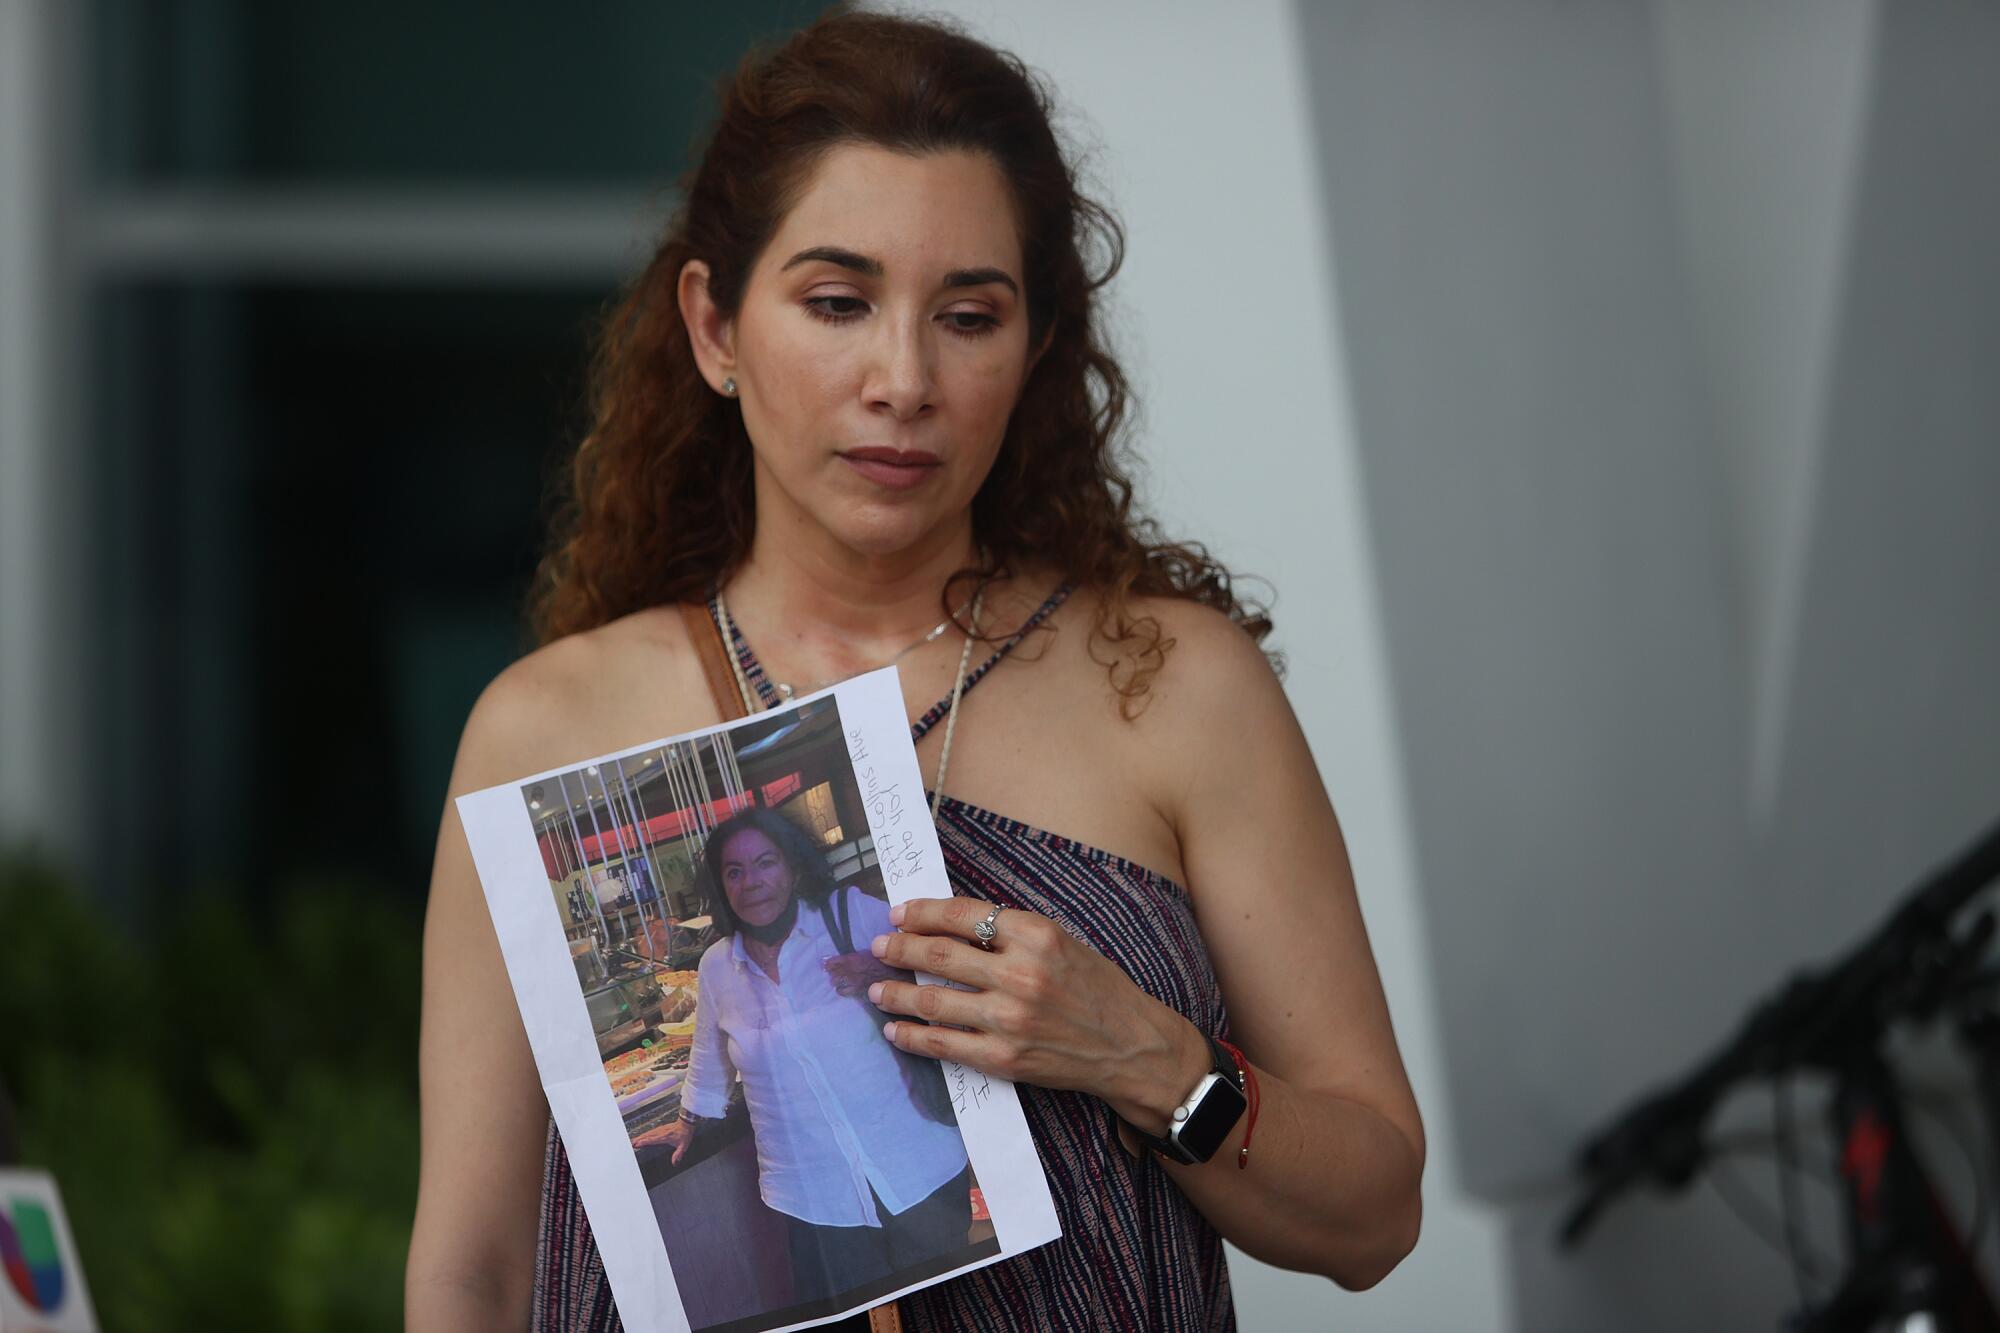 Standing outside the building, a woman holds a picture of another woman.